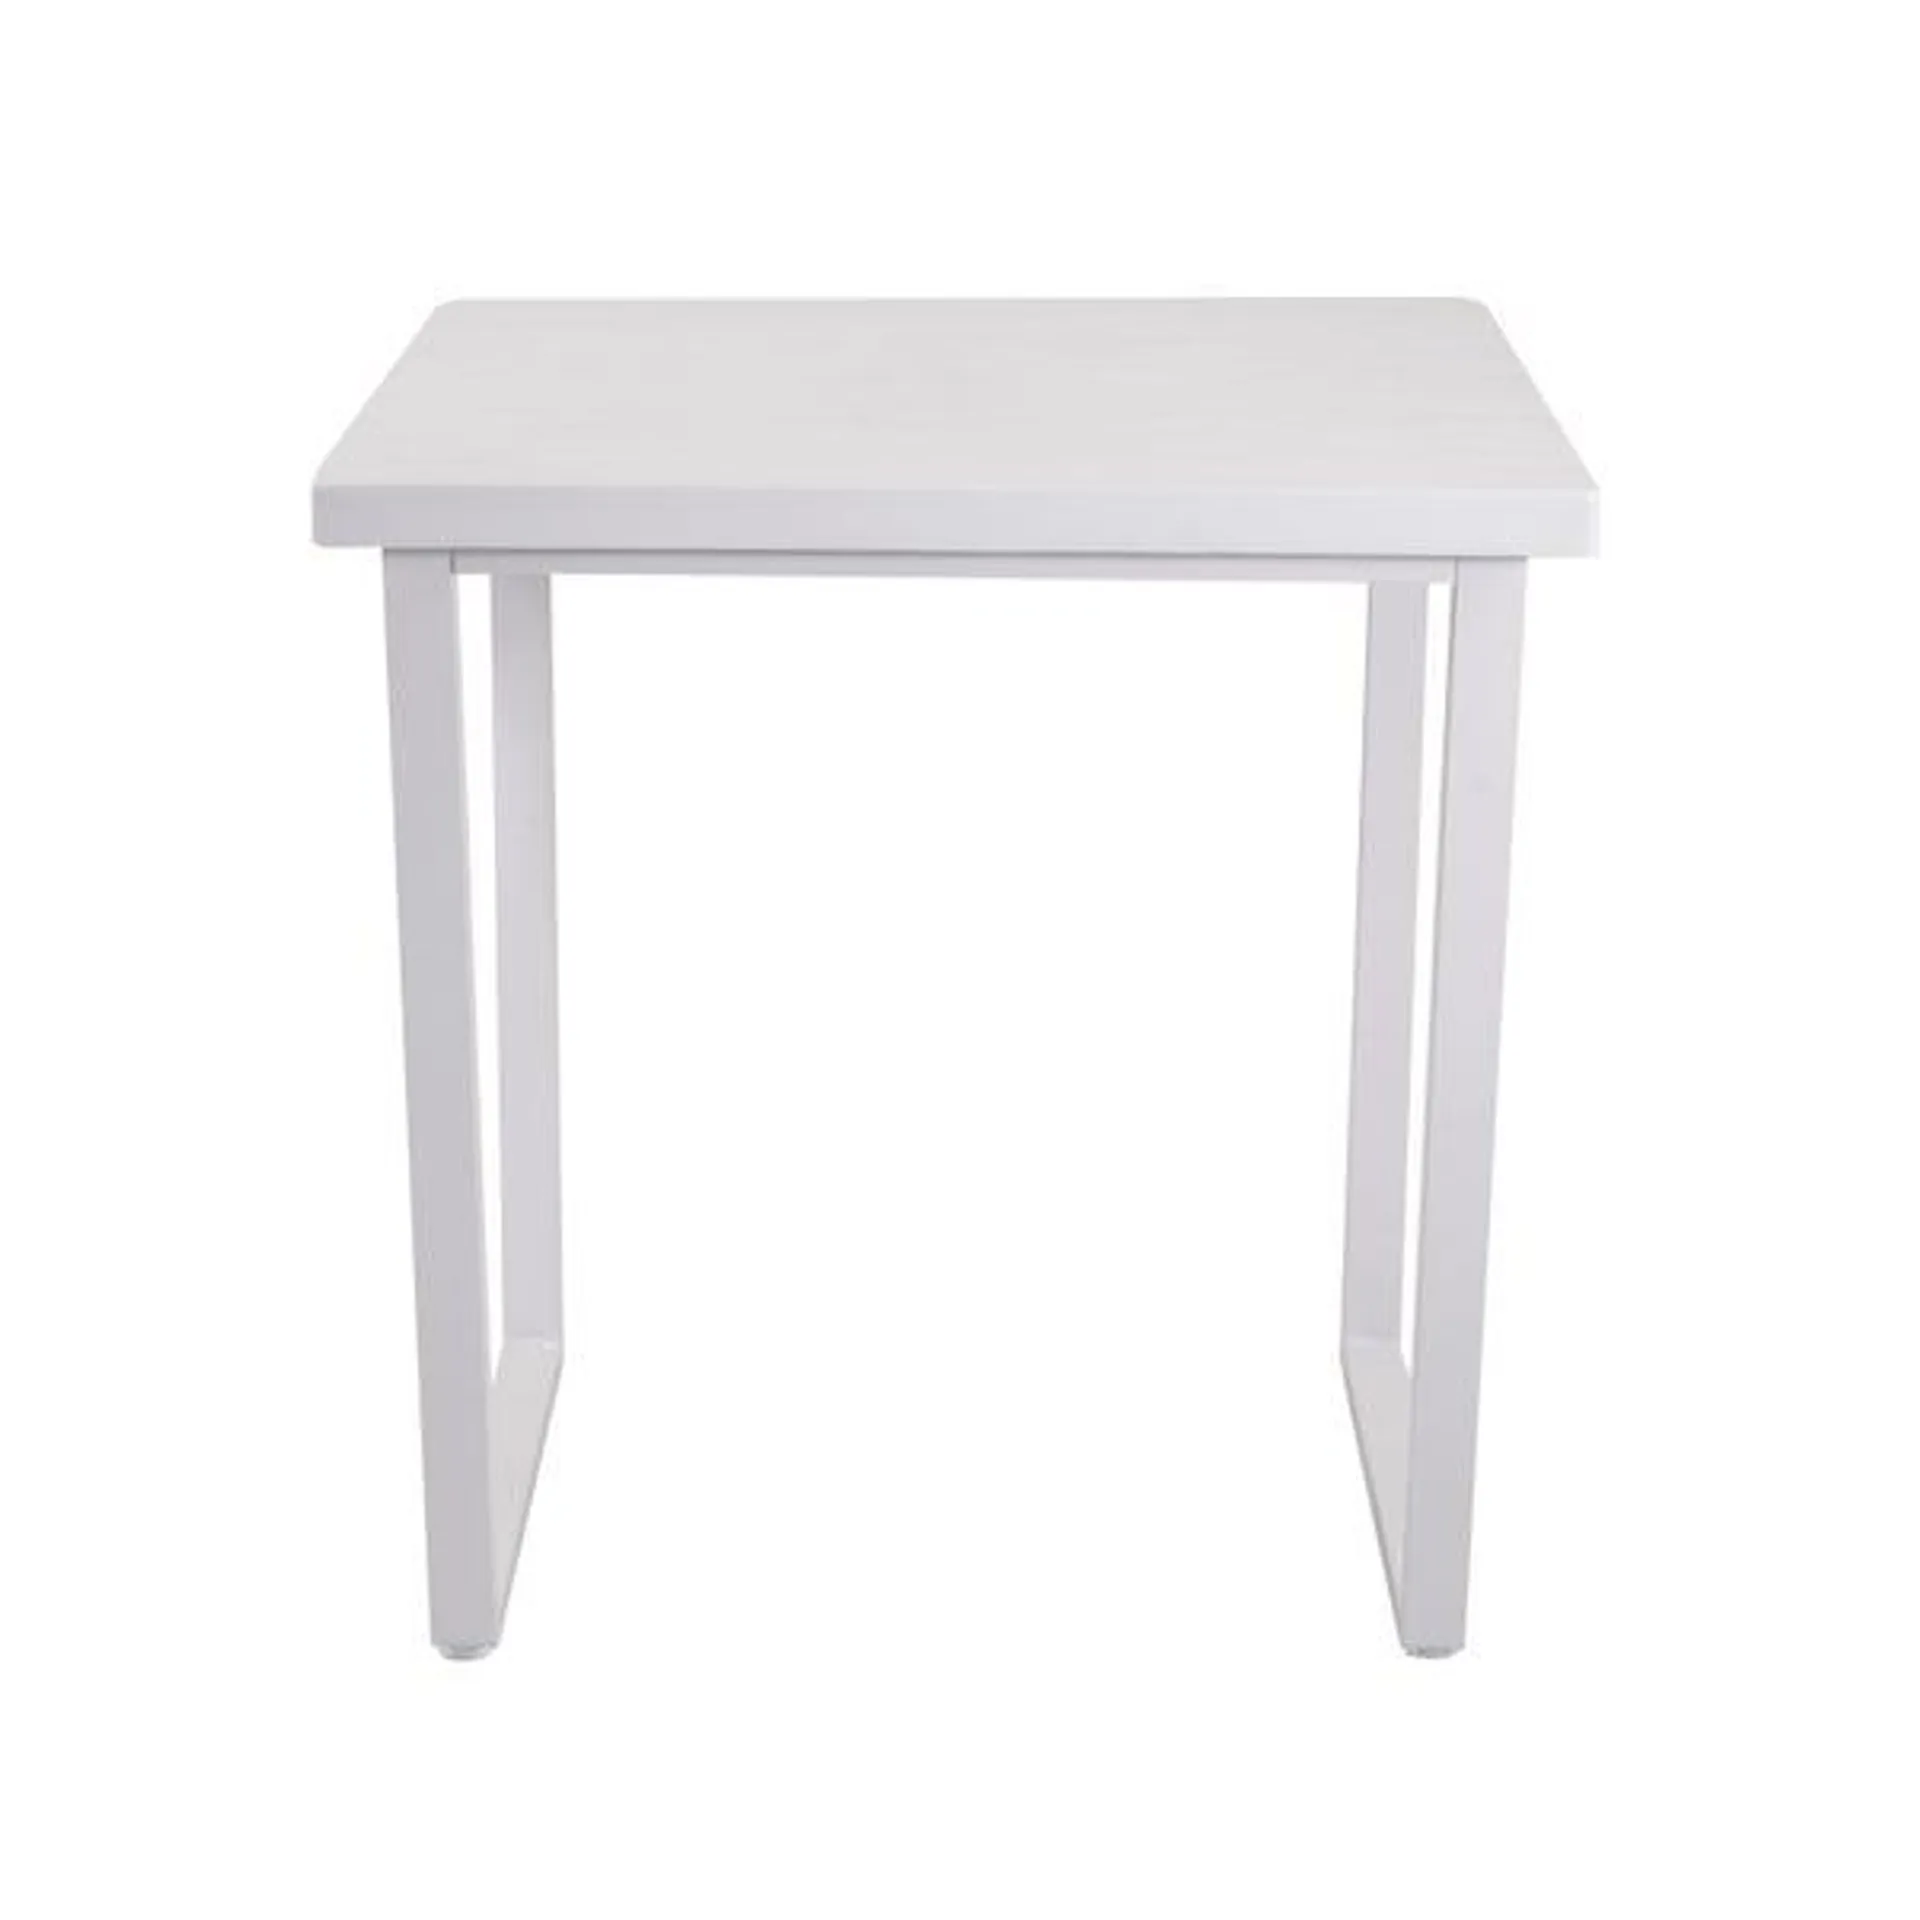 Vixen 2 Seater Square Dining Table